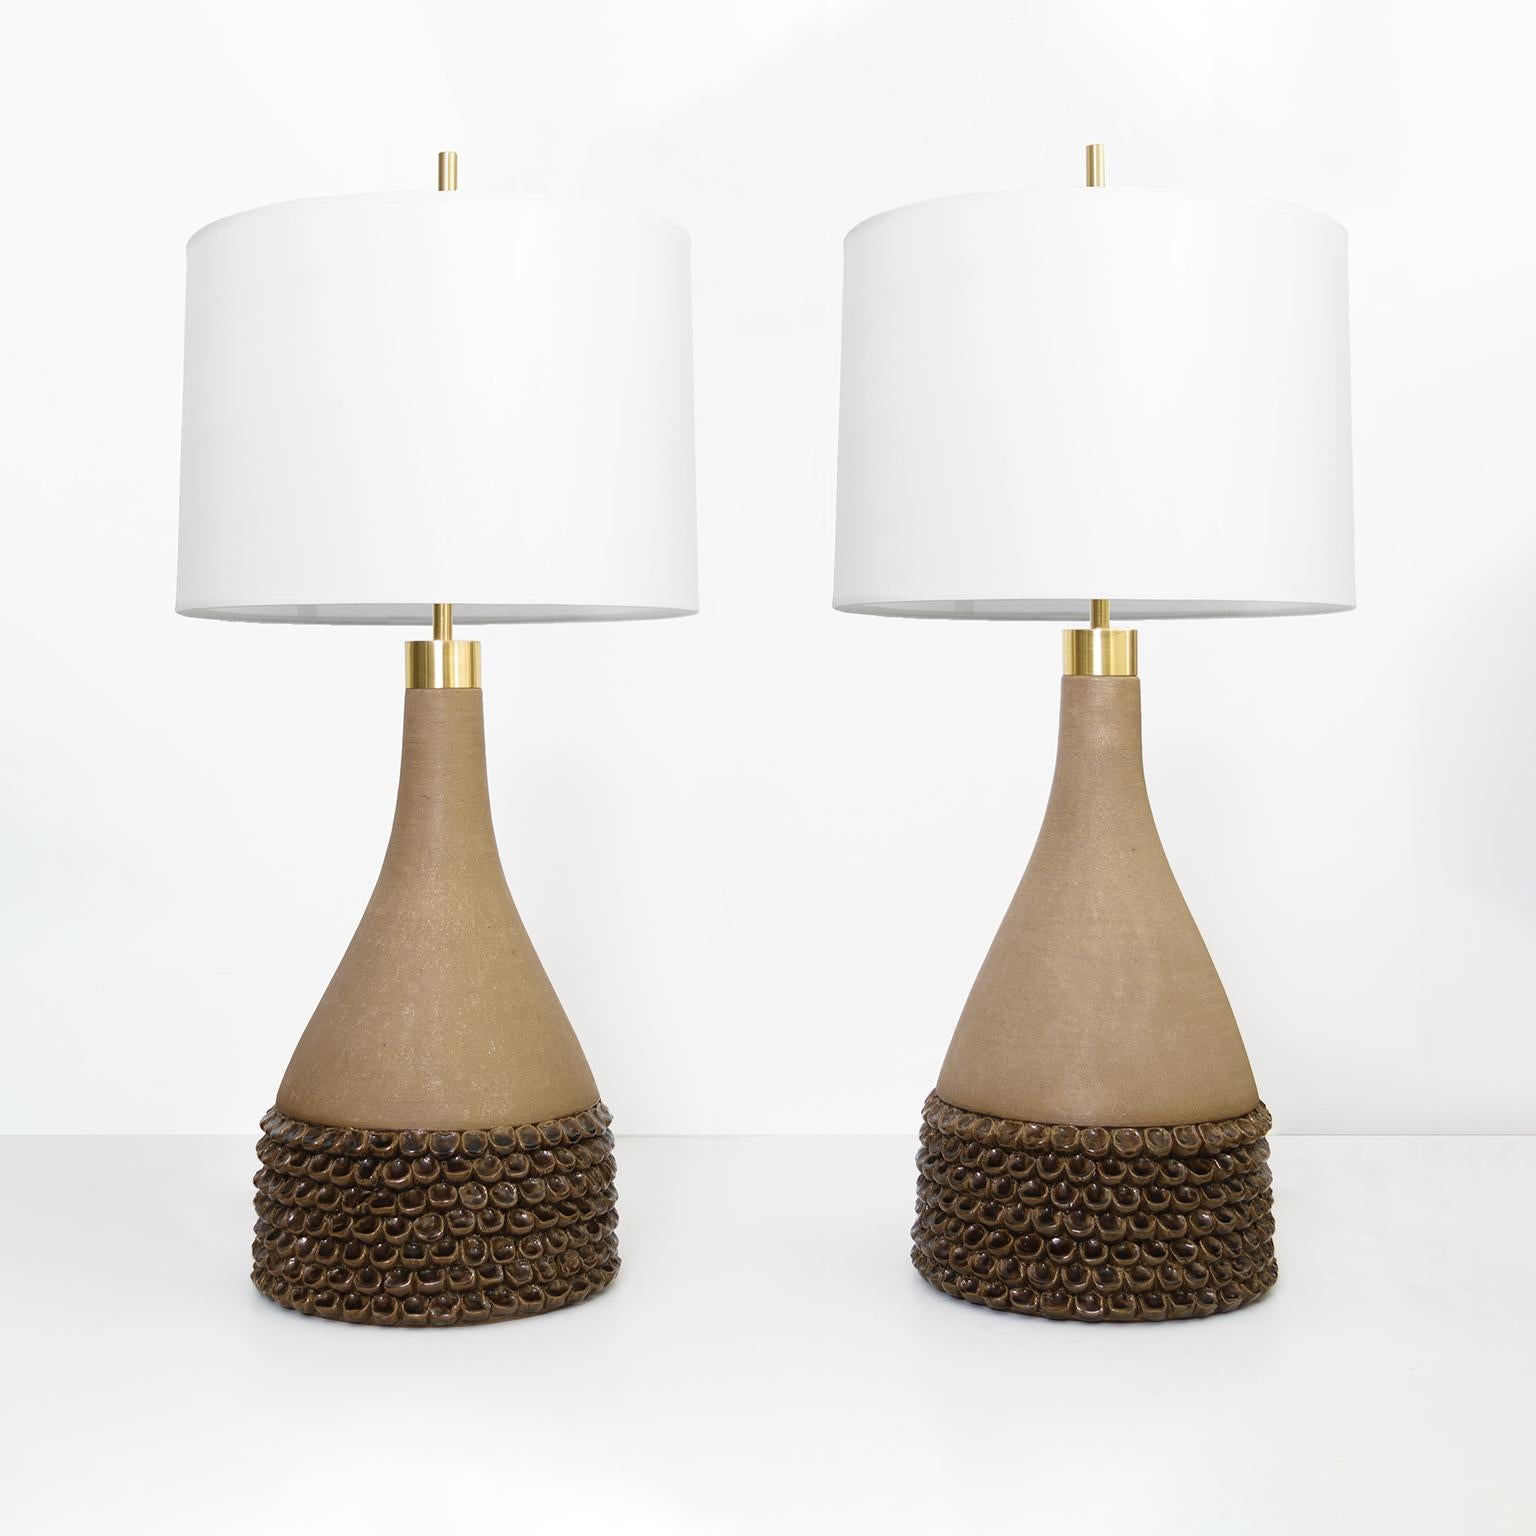 Very large pair of ceramic lamps created by Aage Rasmus Selsbo at his studio Selsbo Keramik, Sweden late 1960’s. The lamps have new customs hardware in brass including a double cluster with standard base sockets for use in the USA. Signed on bottom